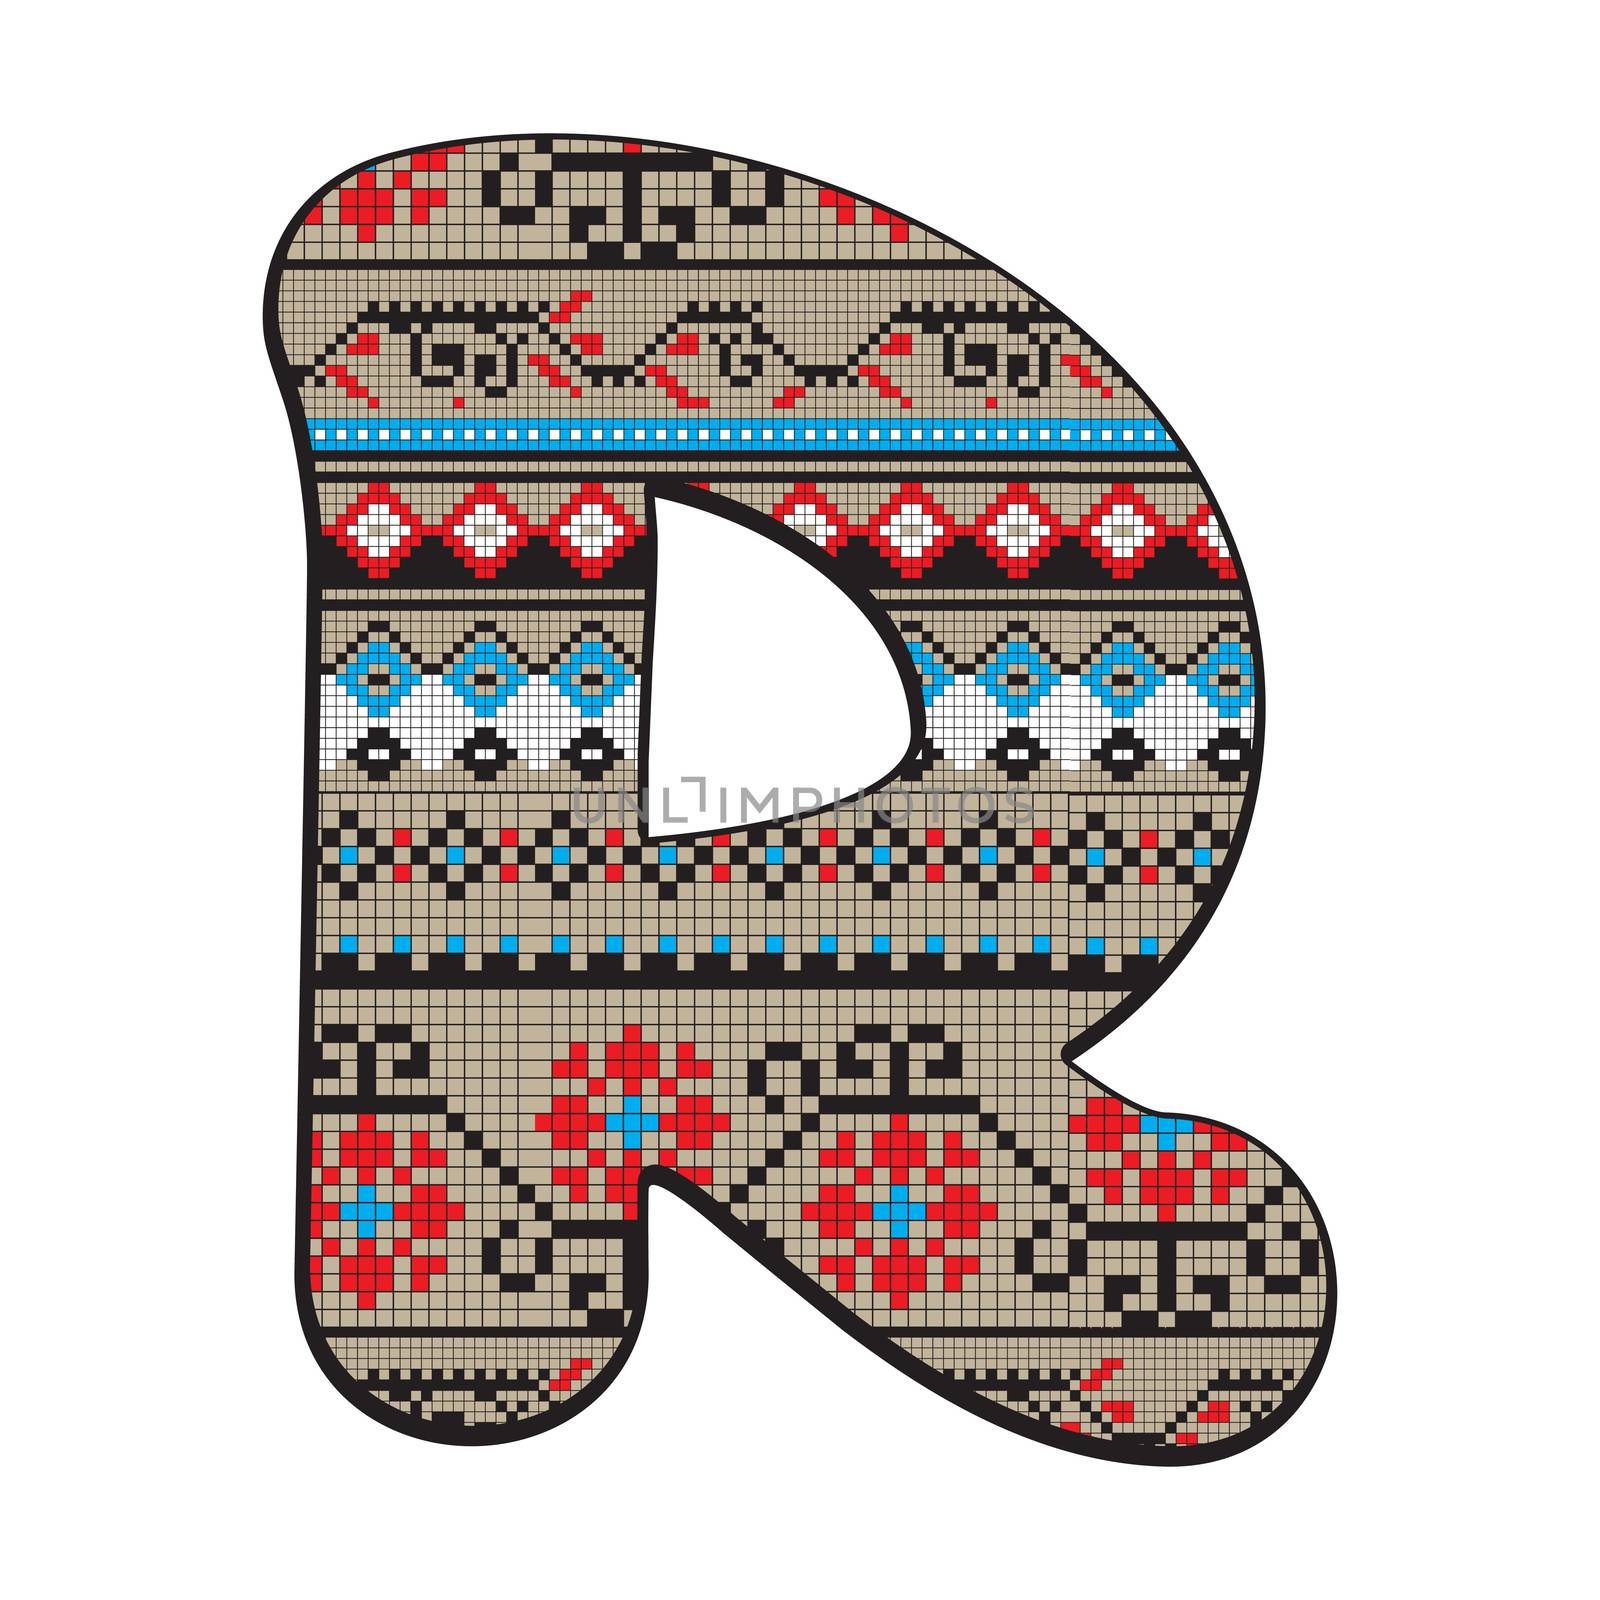 Decorated original font, pixel art ethnic model inspired by a Balkan motif over a funny fat capital letter R isolated on white